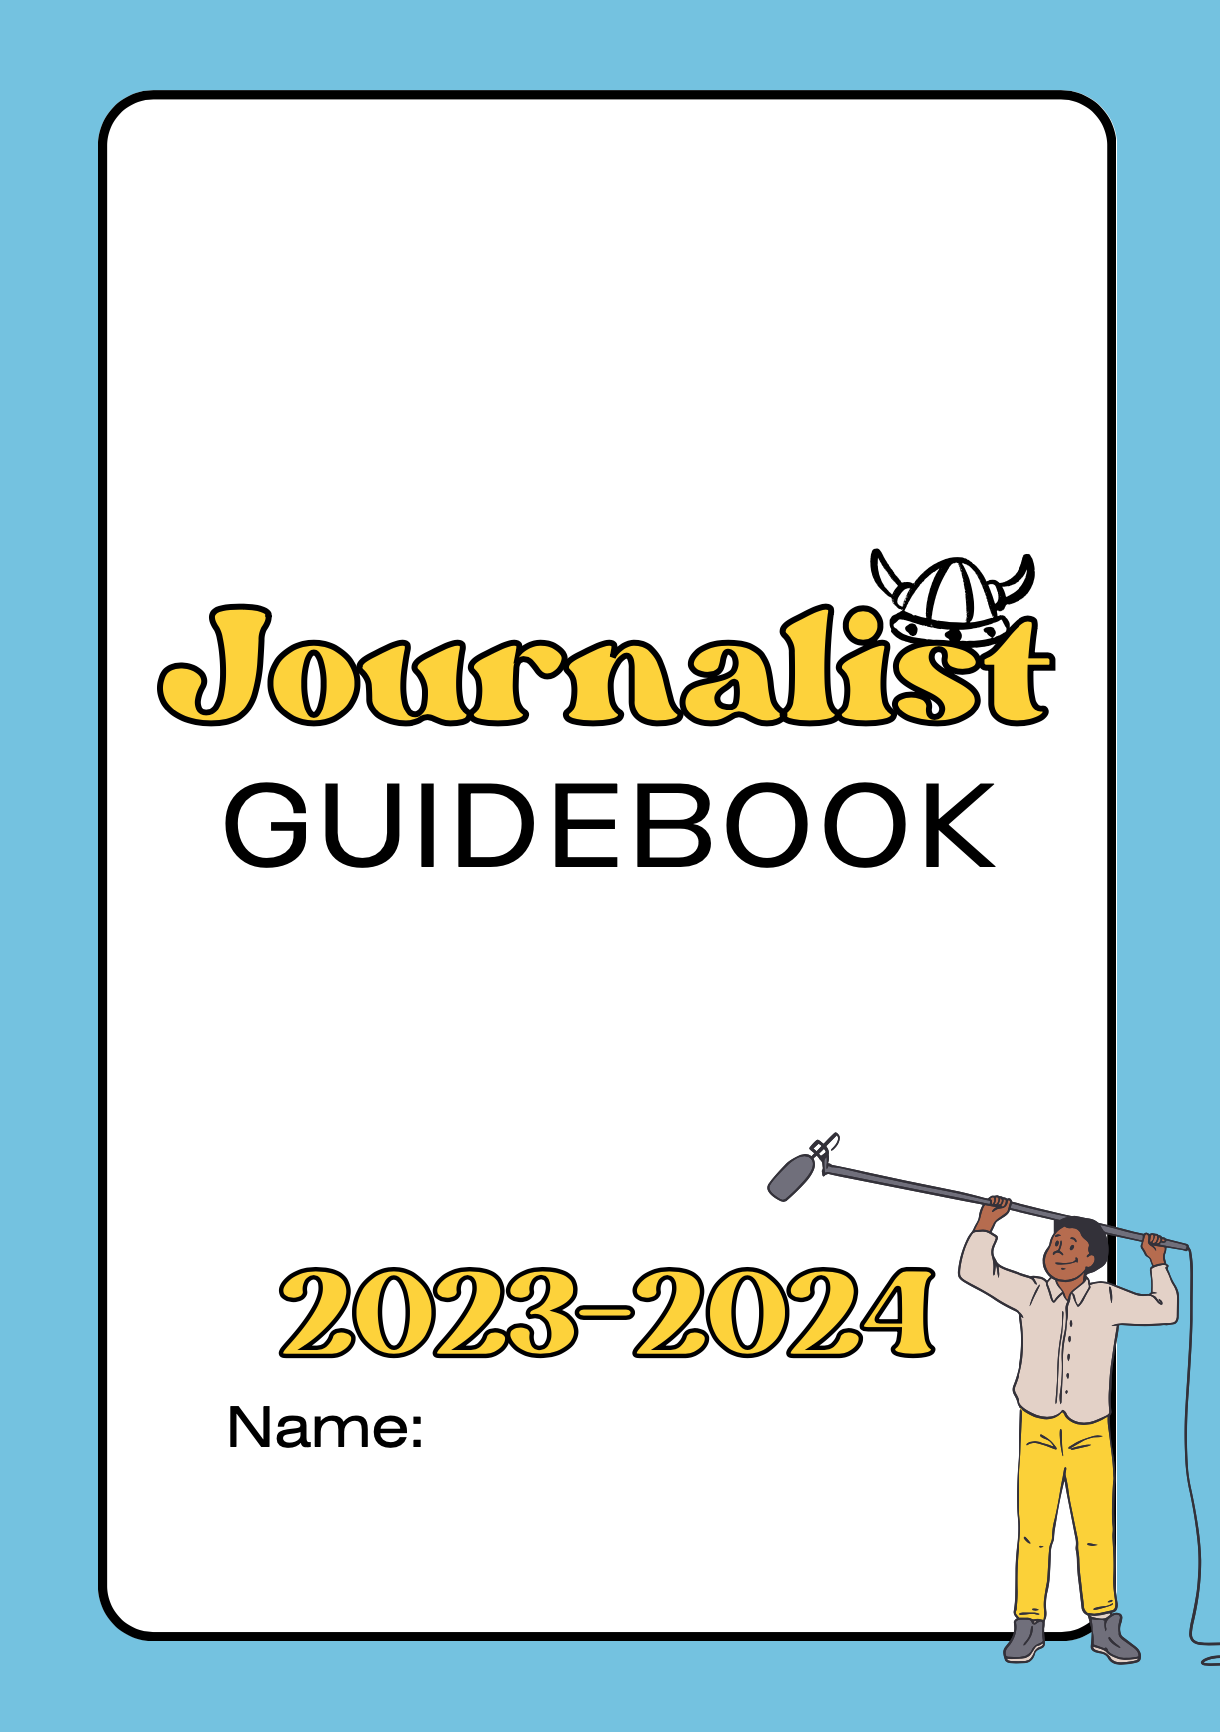 Cover of Journalist Guidebook 2023-2024 with cartoon character.